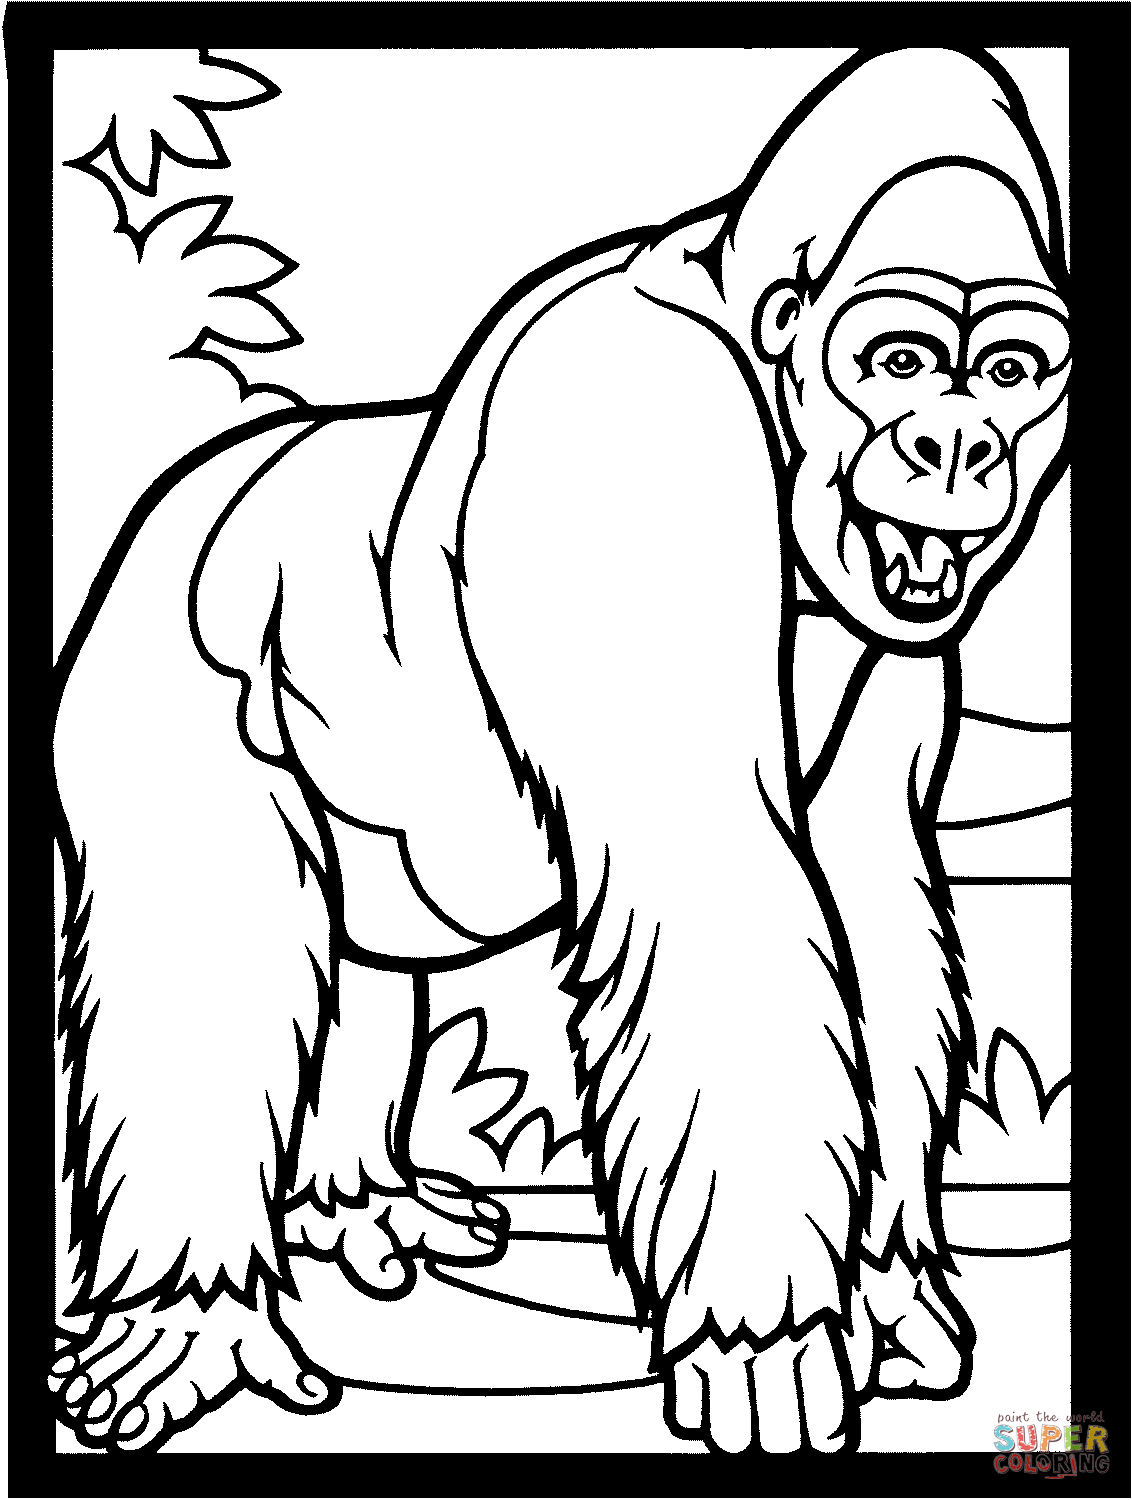 Gorilla Smiles coloring page | Free Printable Coloring Pages